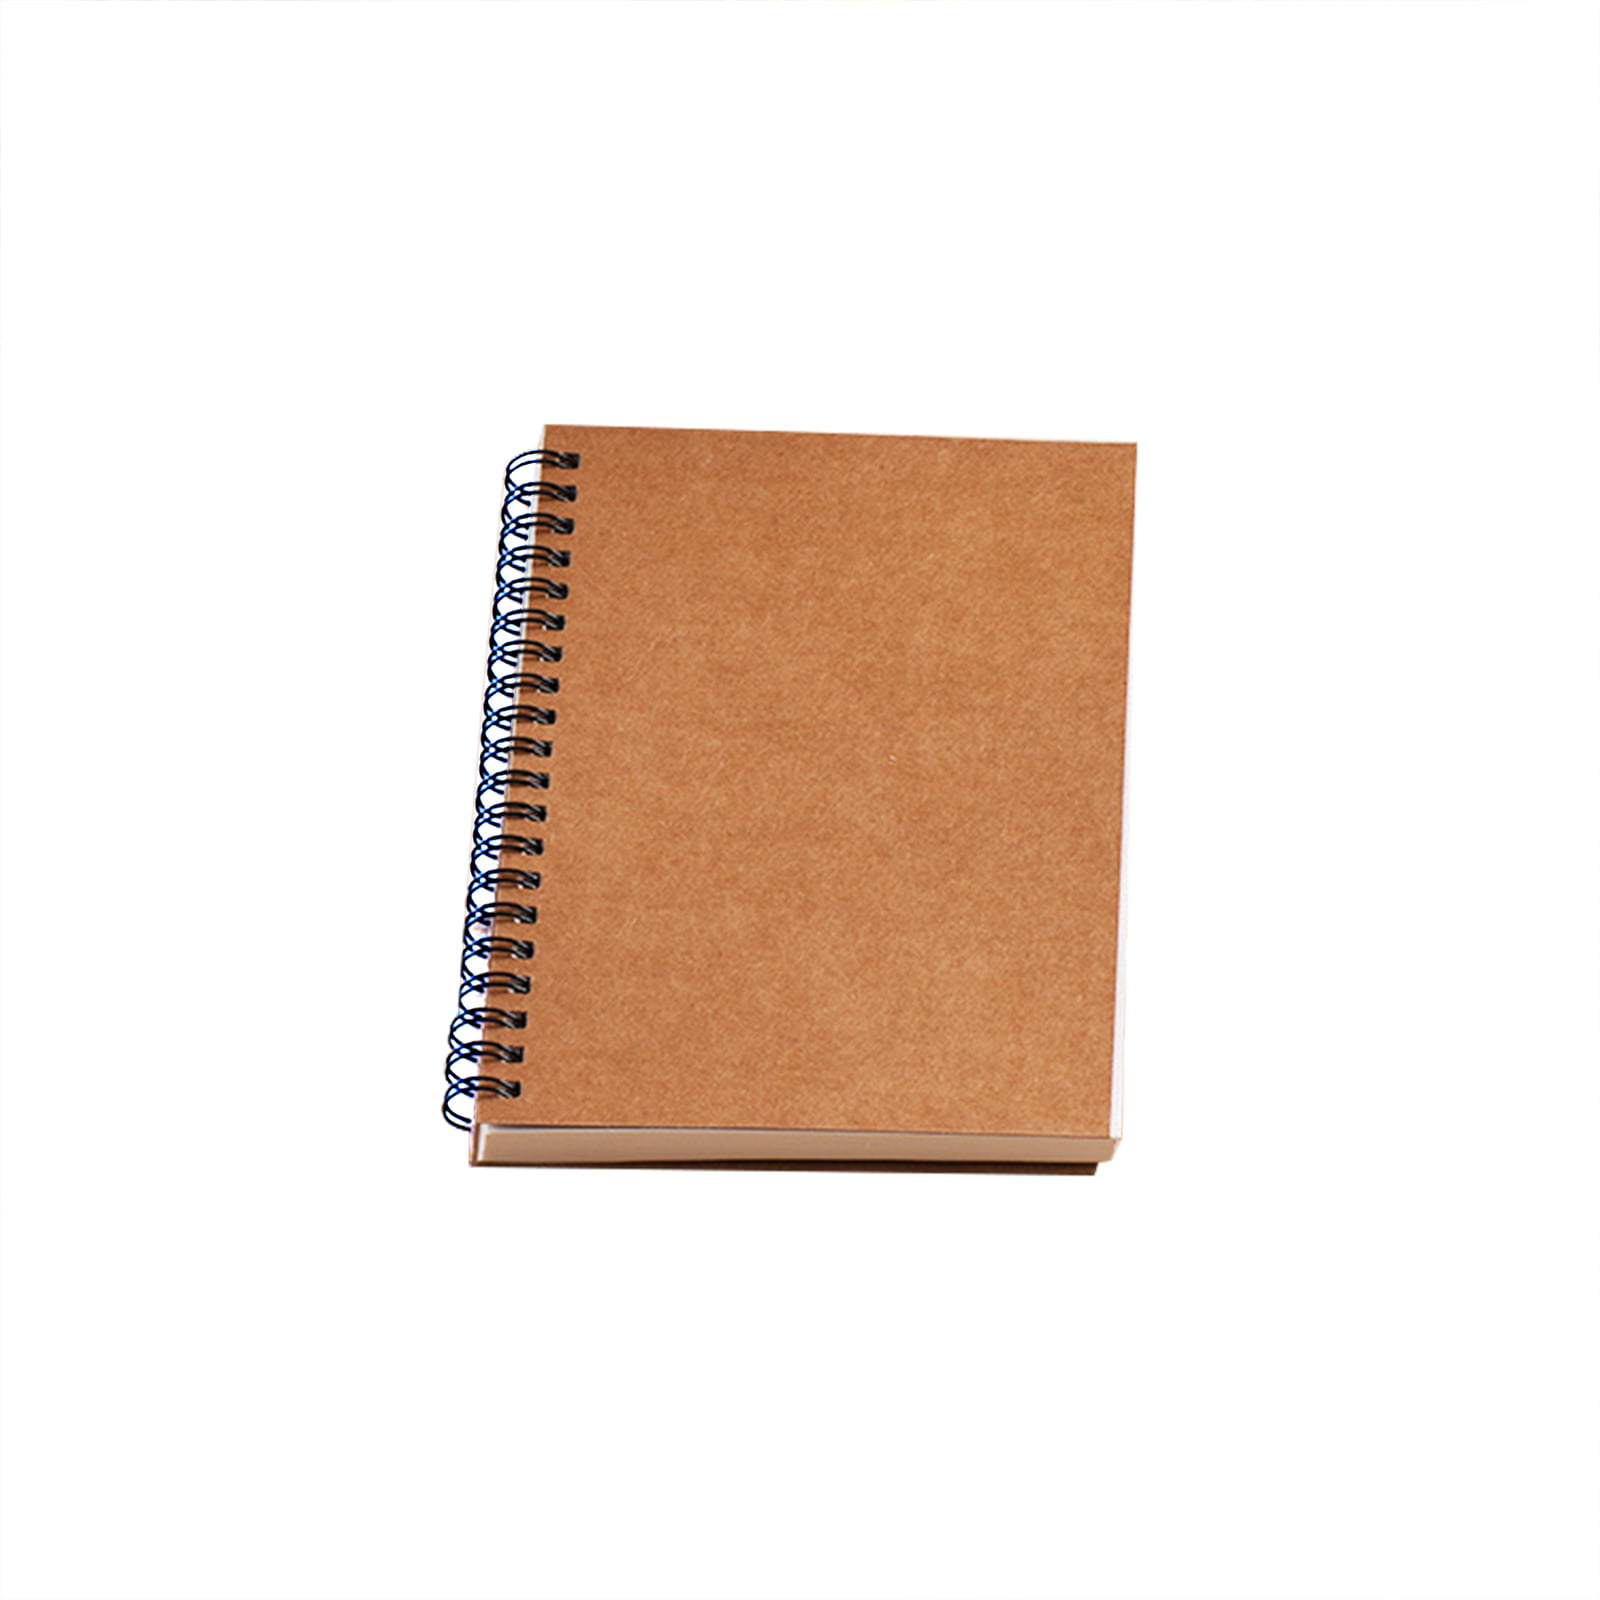 Handmade Daily Notepad Organizer Journal Blank Sketch book Spiral Coil Paper Pad 